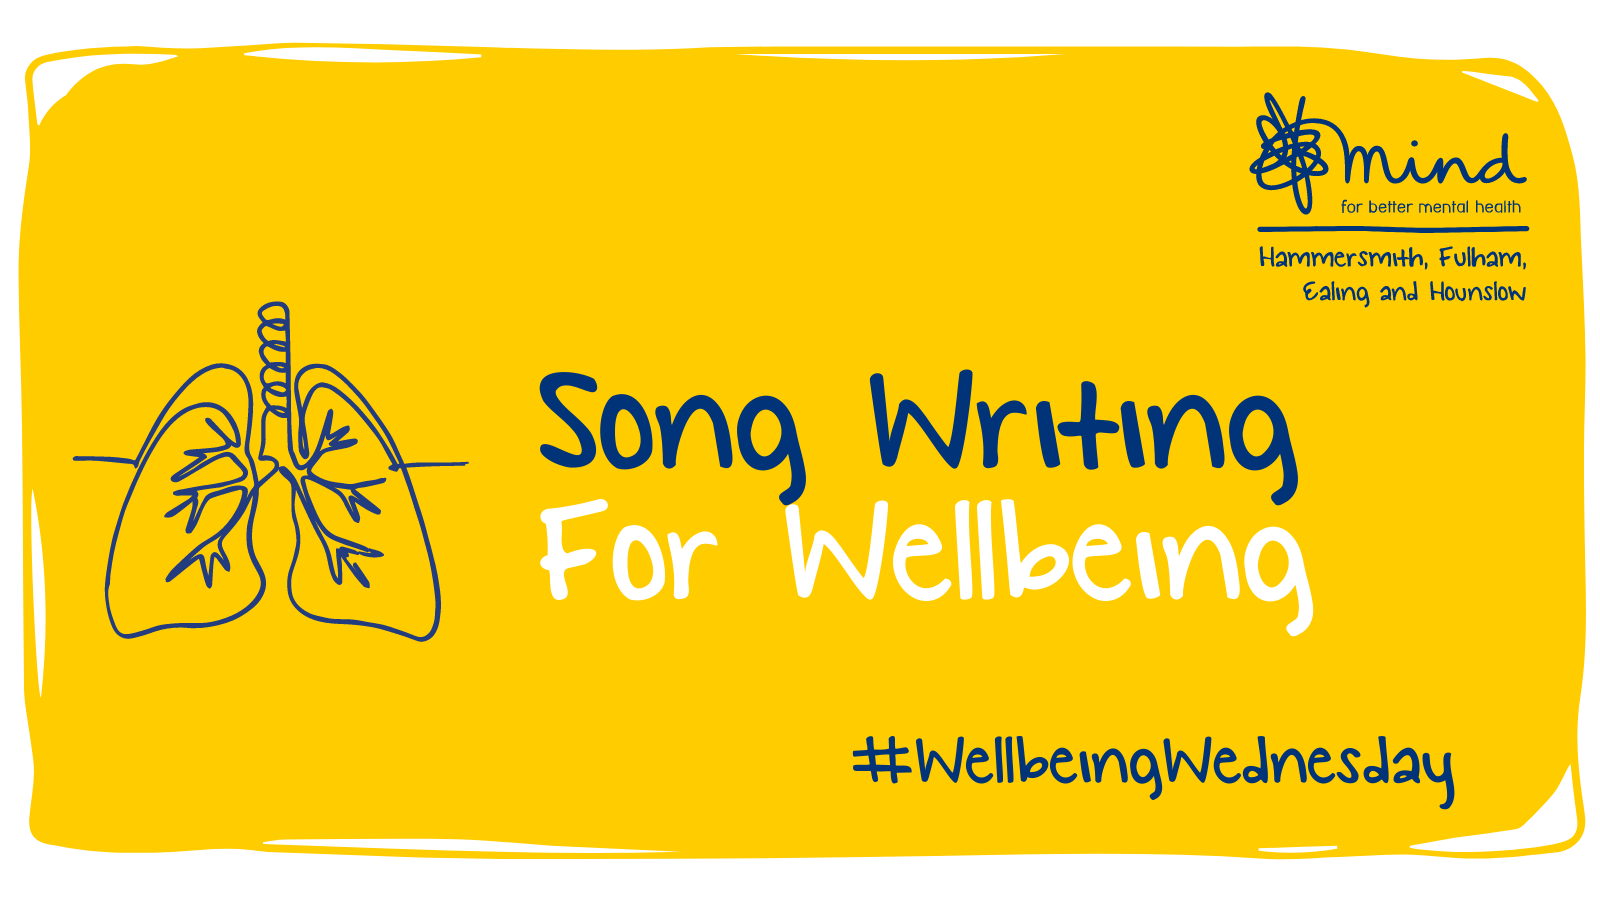 Song Writing for Wellbeing